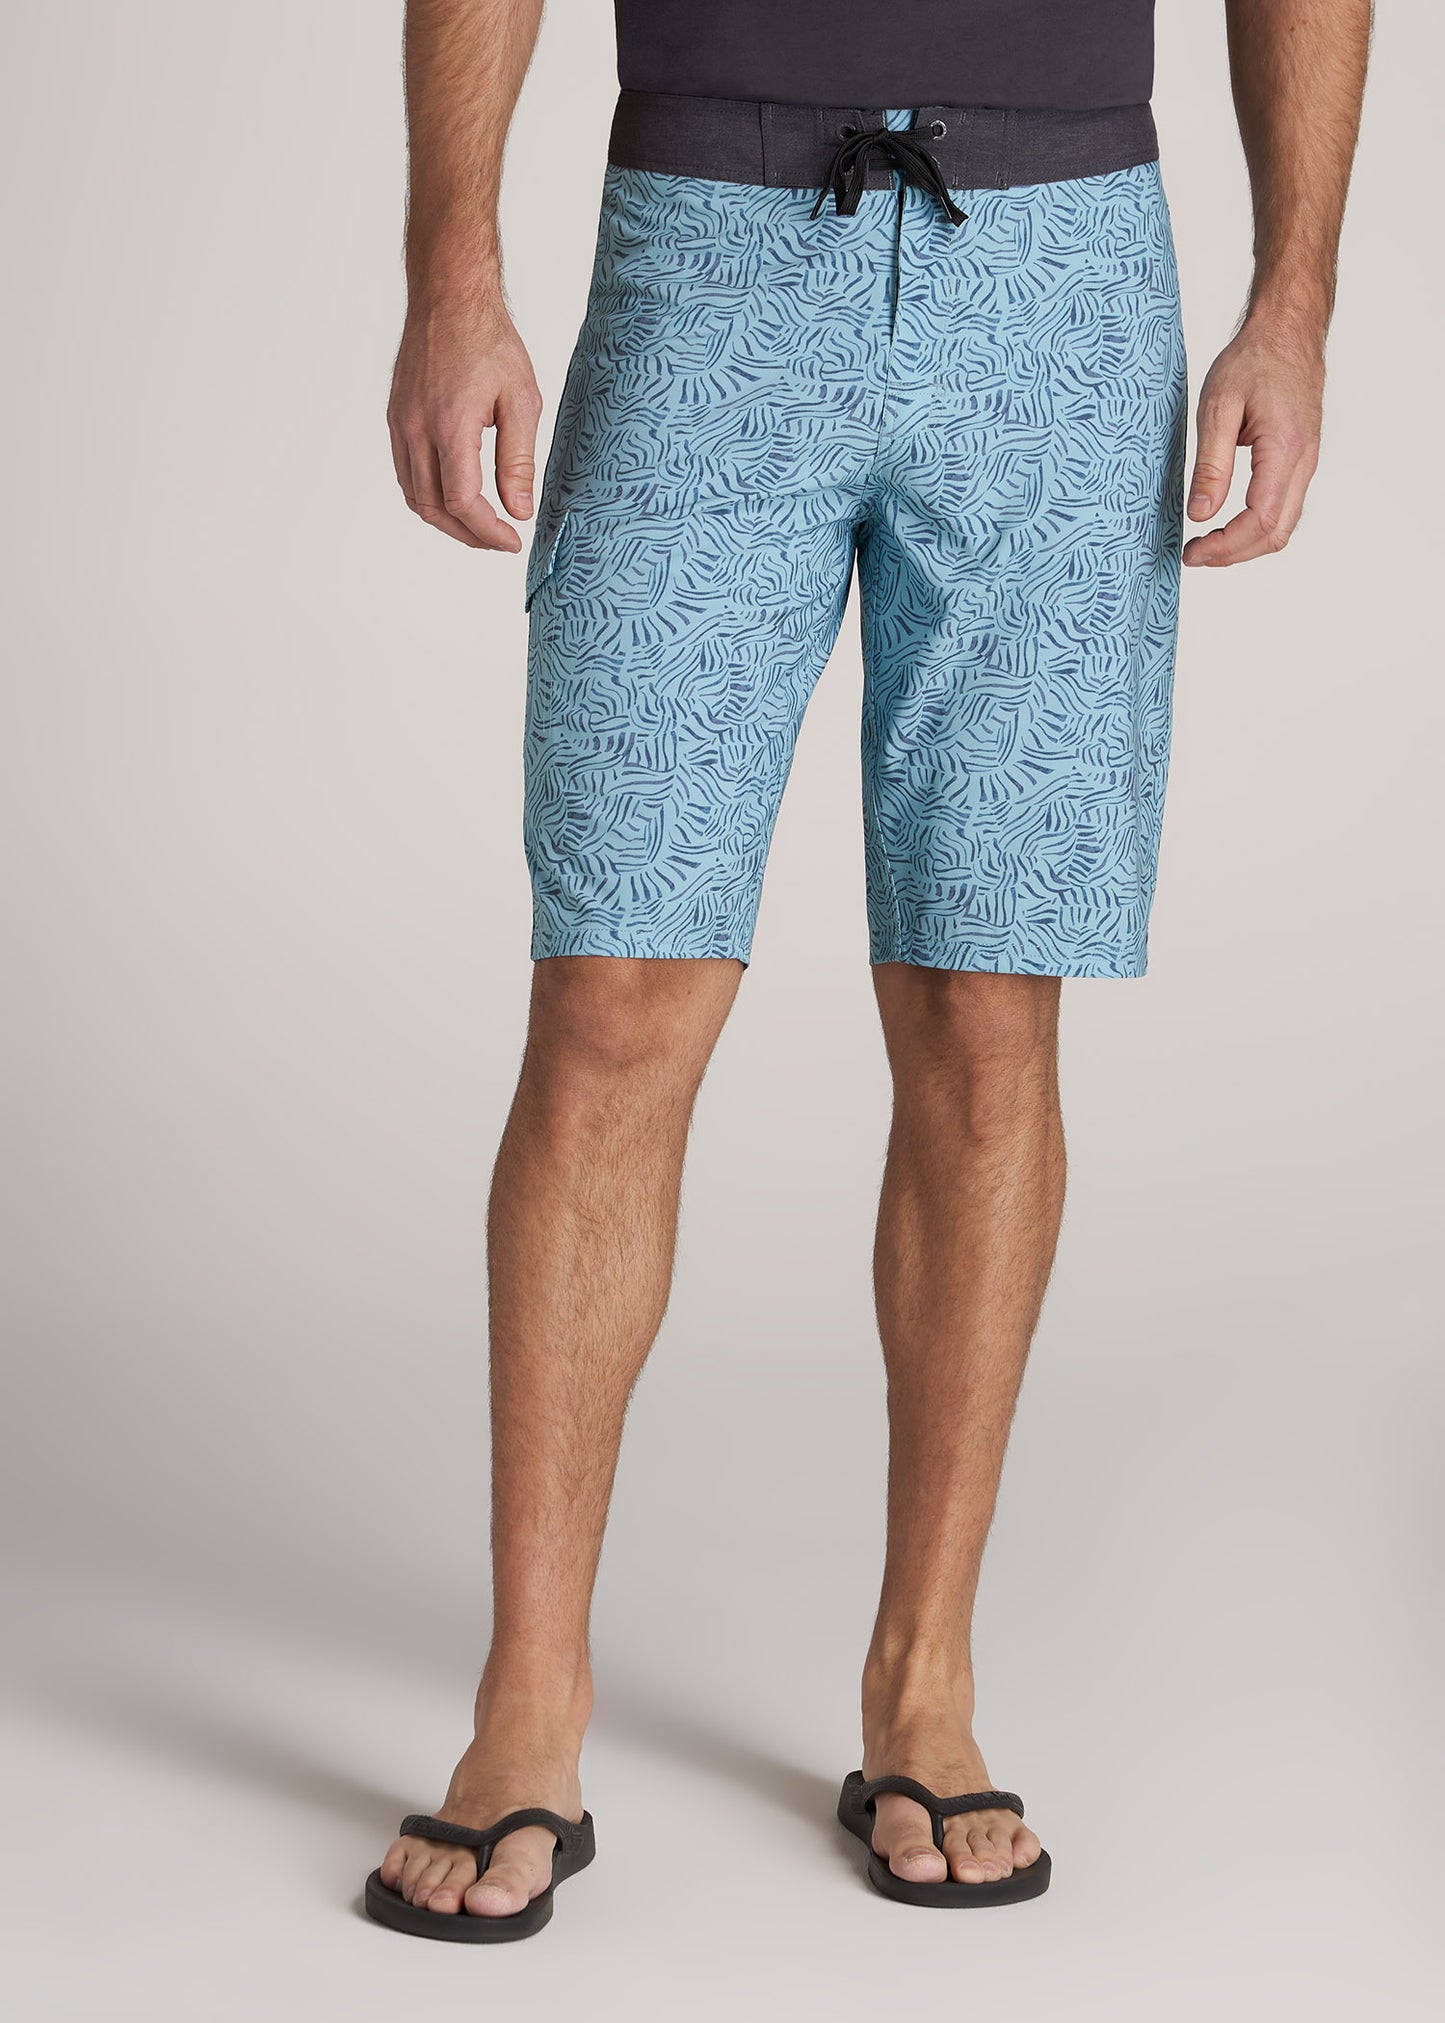    American-Tall-Men-BoardShort-TealAbstract-front